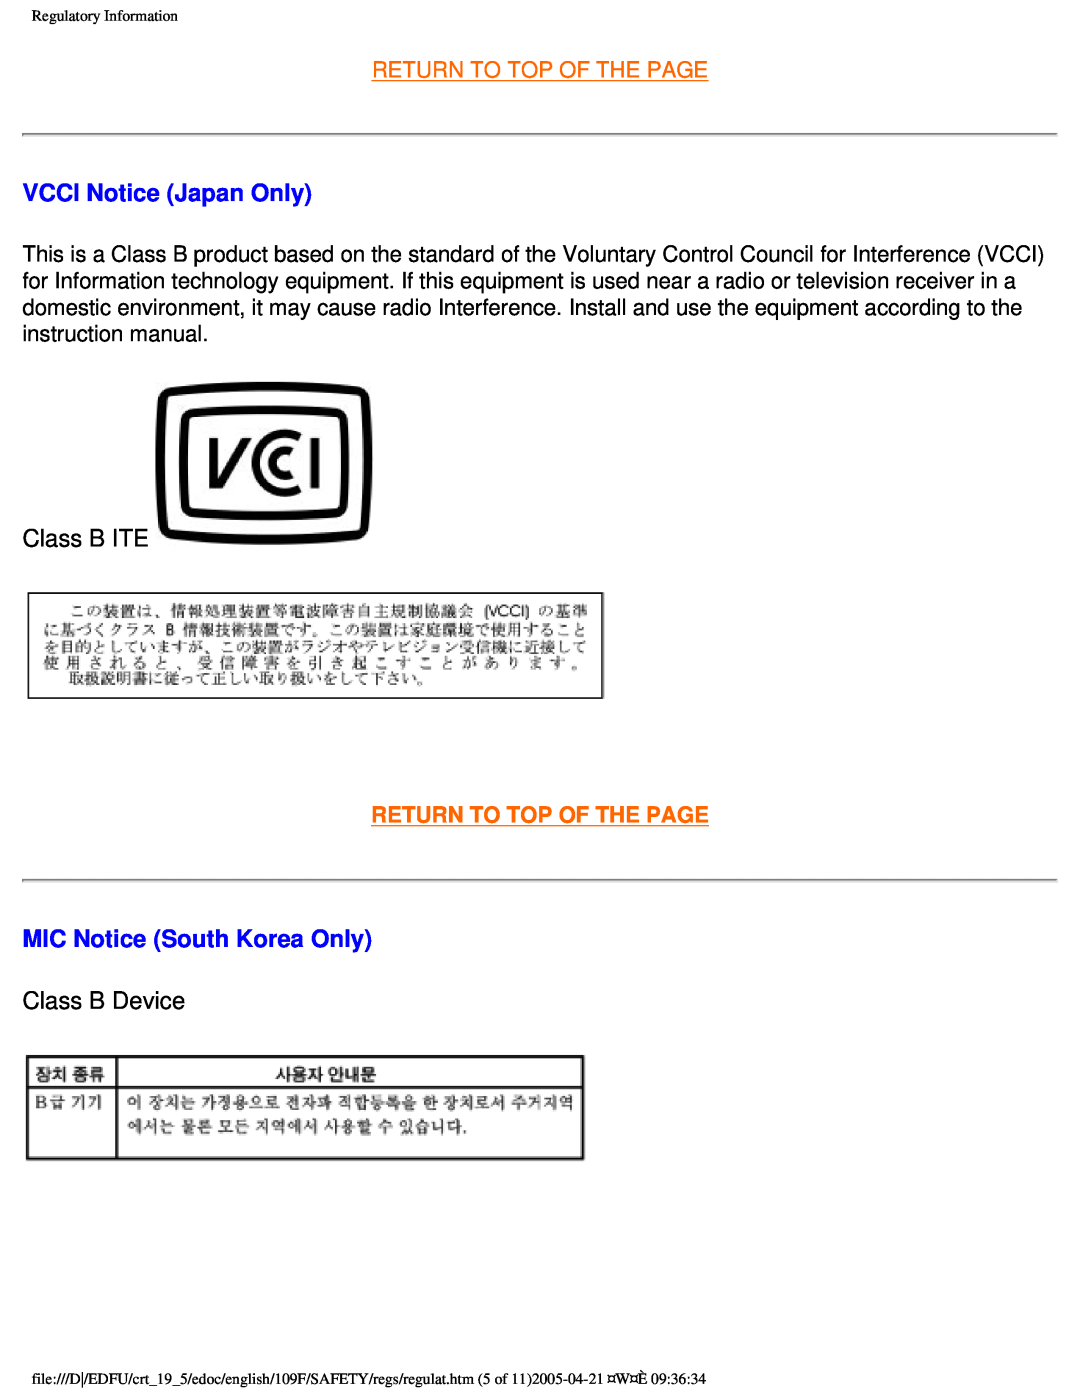 Philips 109F VCCI Notice Japan Only, MIC Notice South Korea Only, Class B ITE, Class B Device, Return To Top Of The Page 